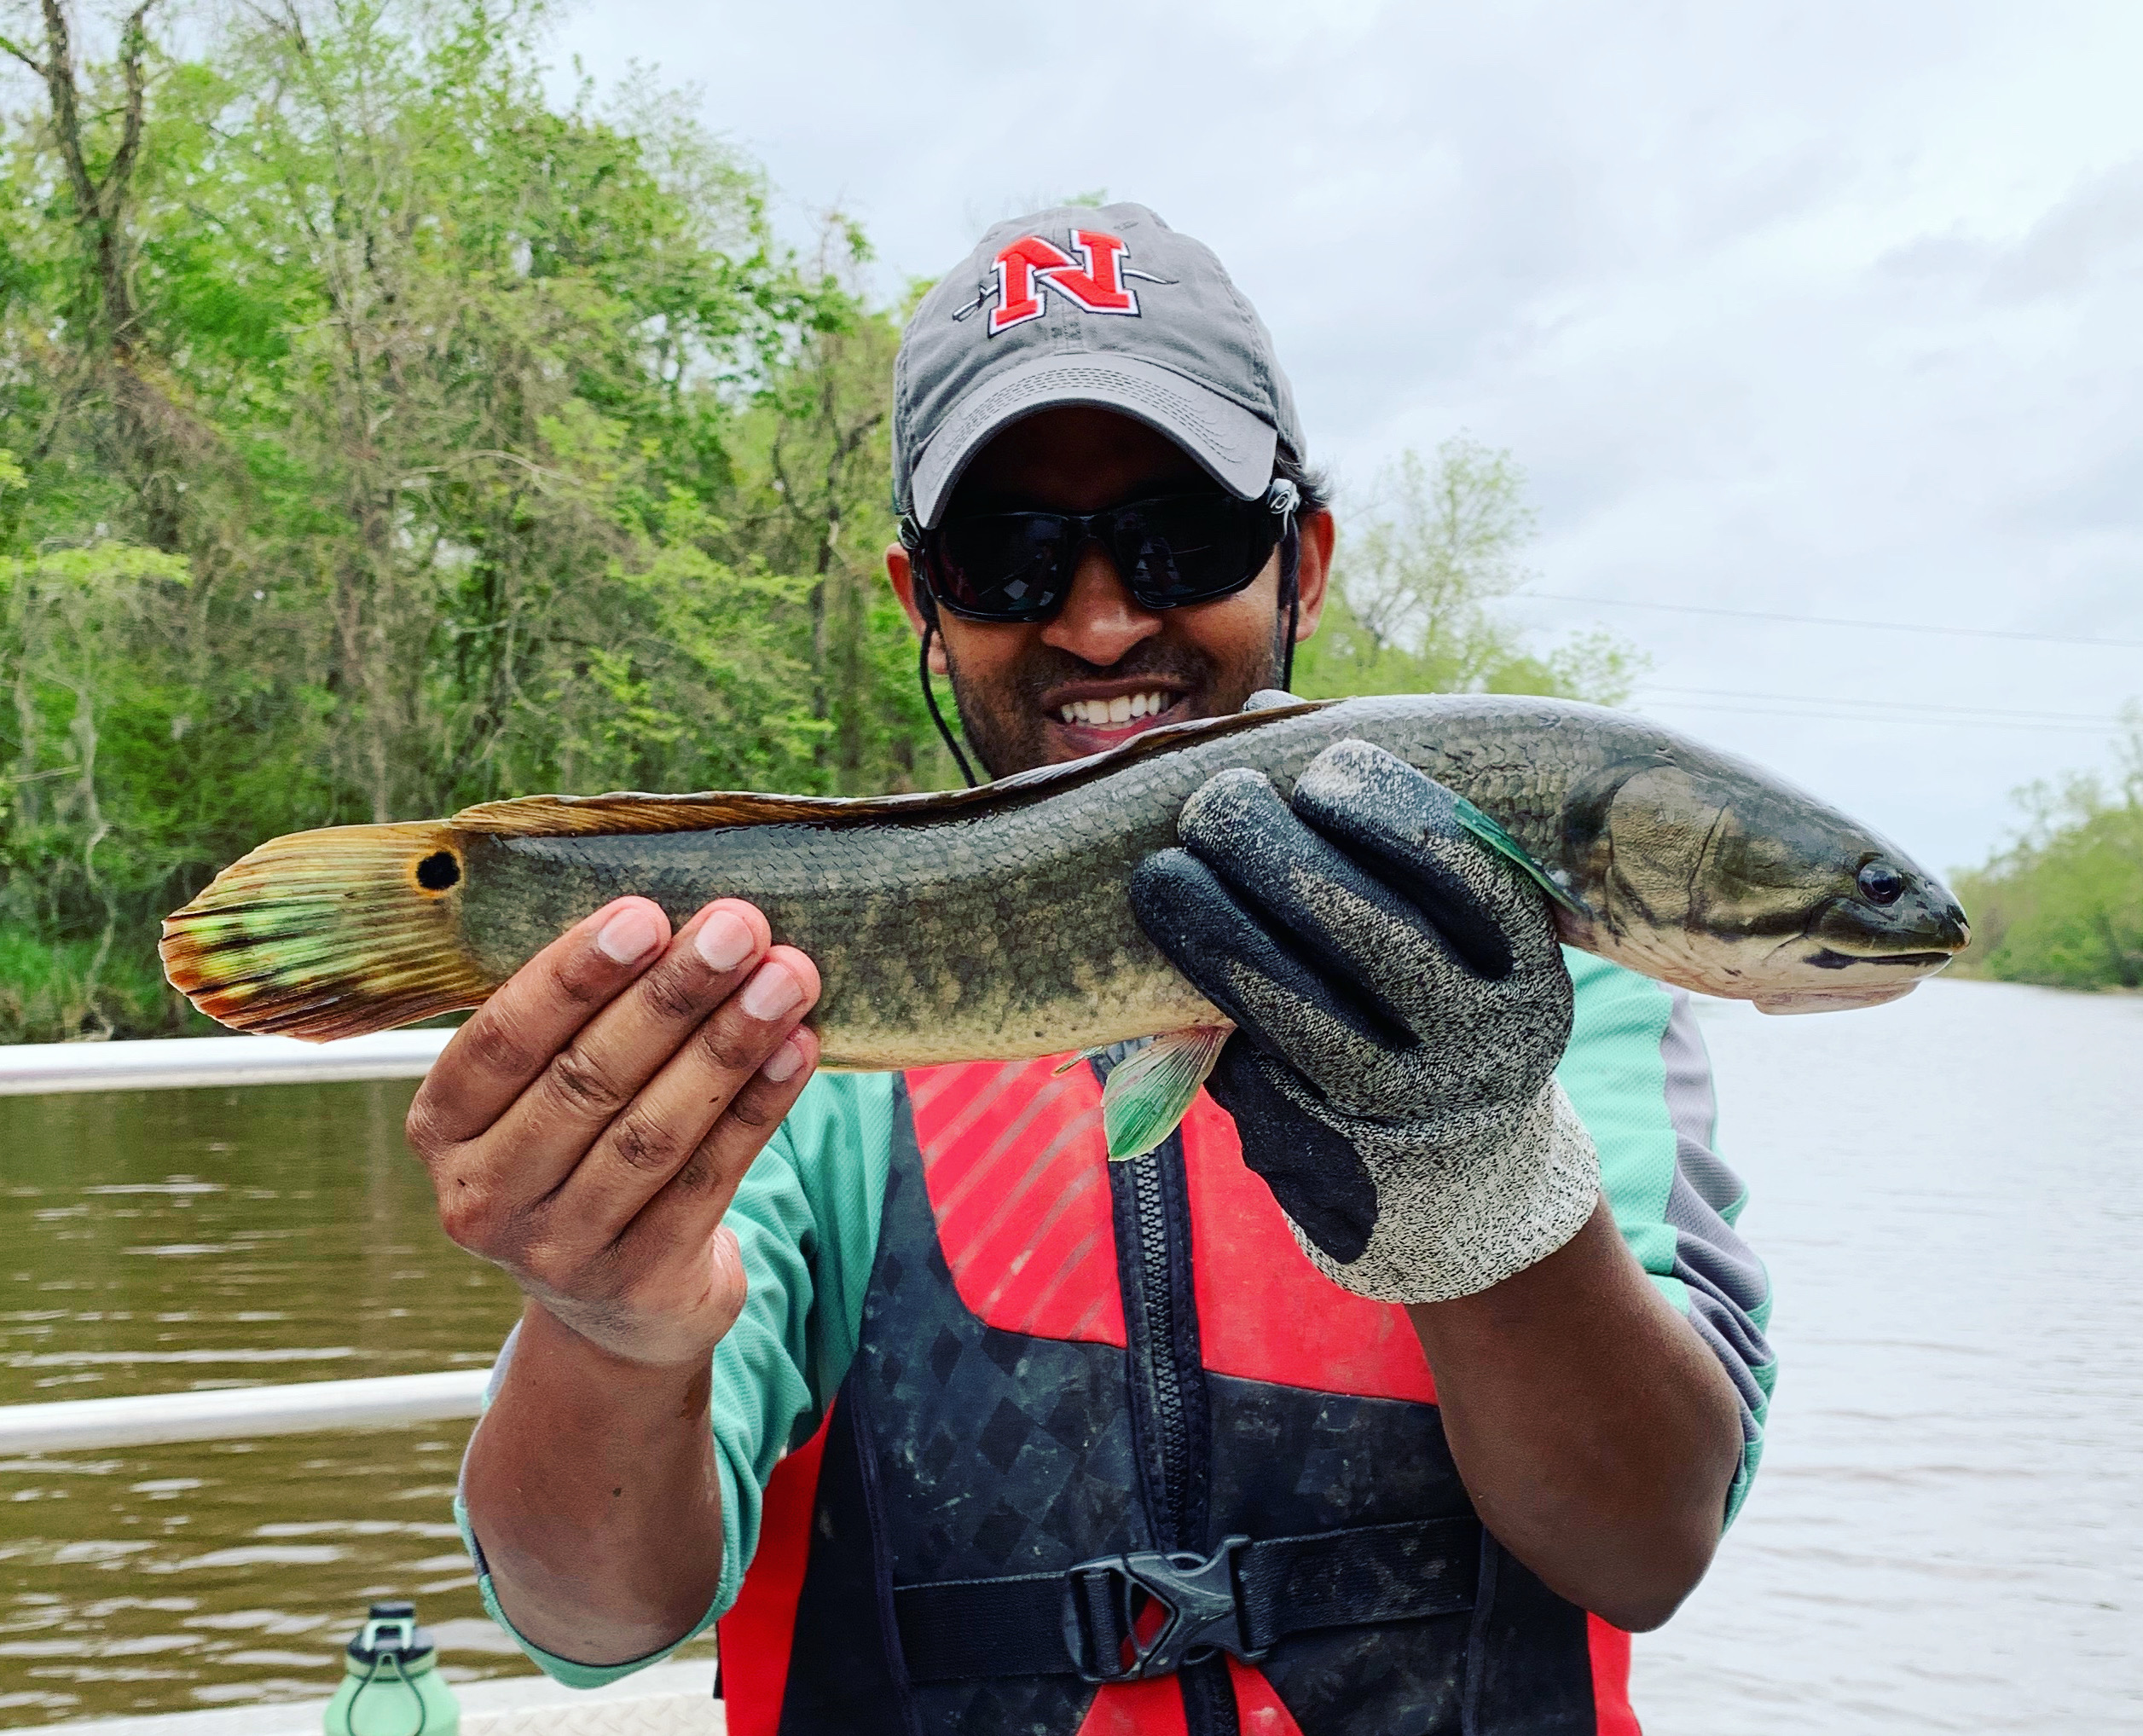 Man with hat smiles holding a medium-sized bowfin fish. It has bright green fins